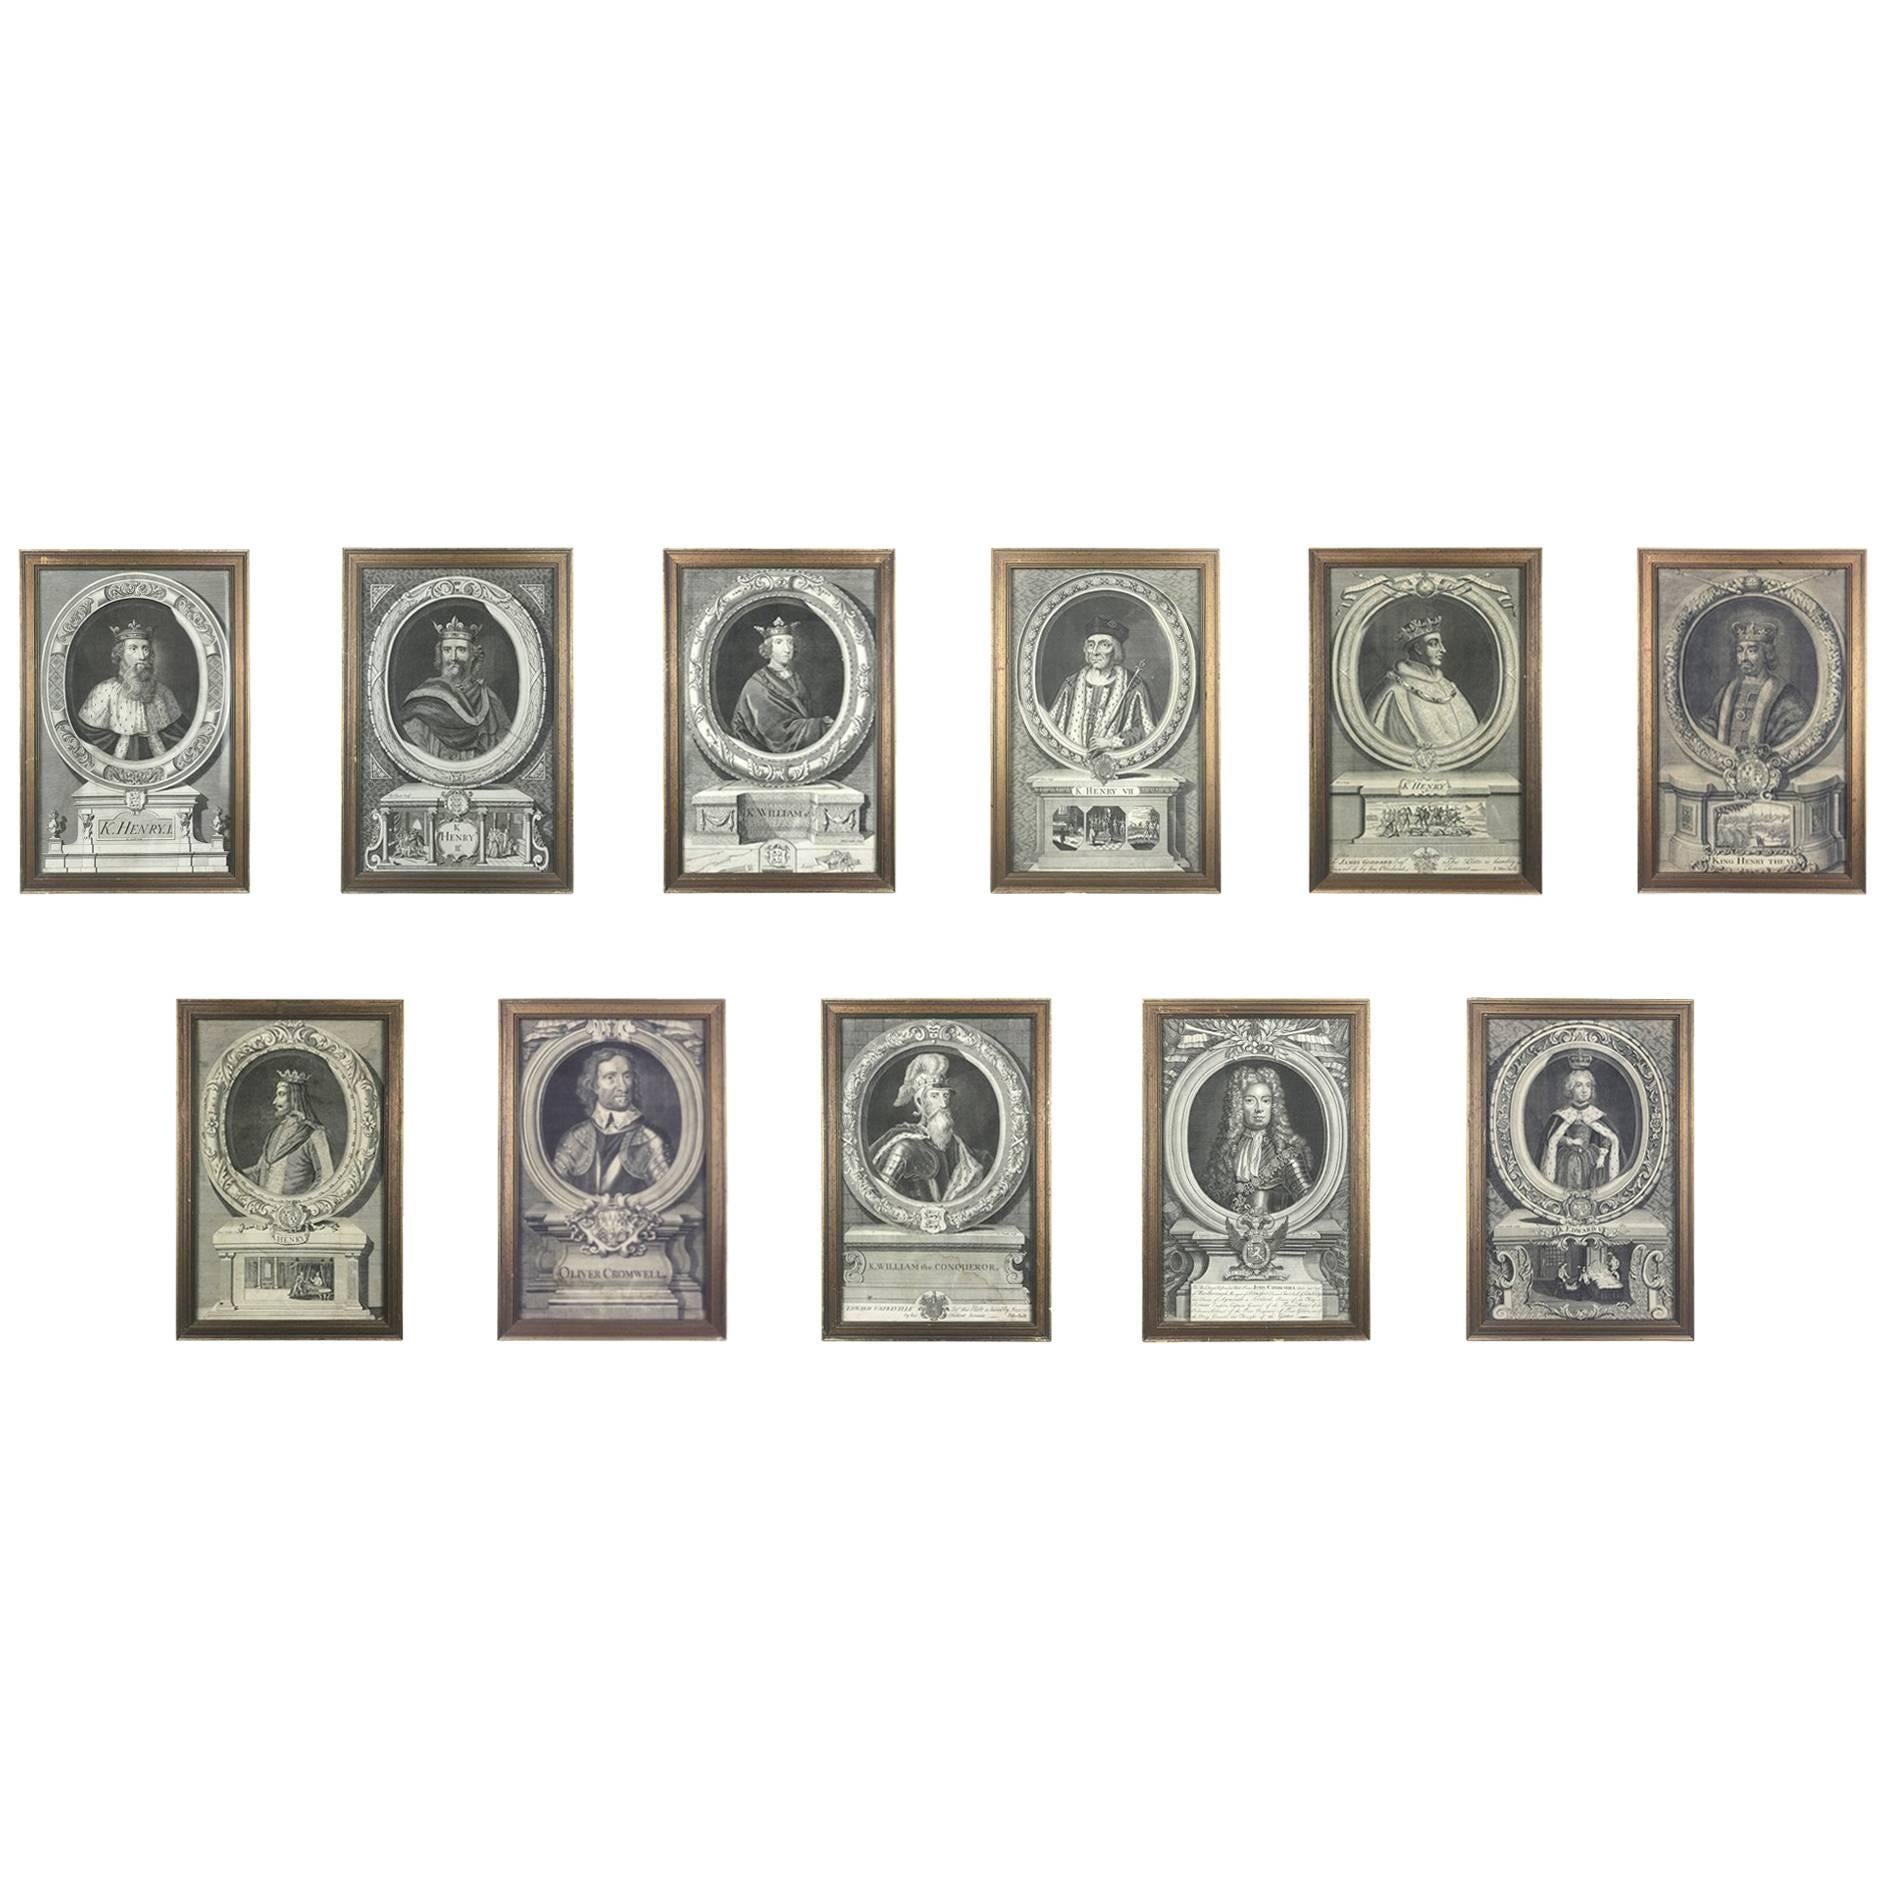 Set of 11 Framed Engravings of Illustrious Persons of Great Britain, circa 1750